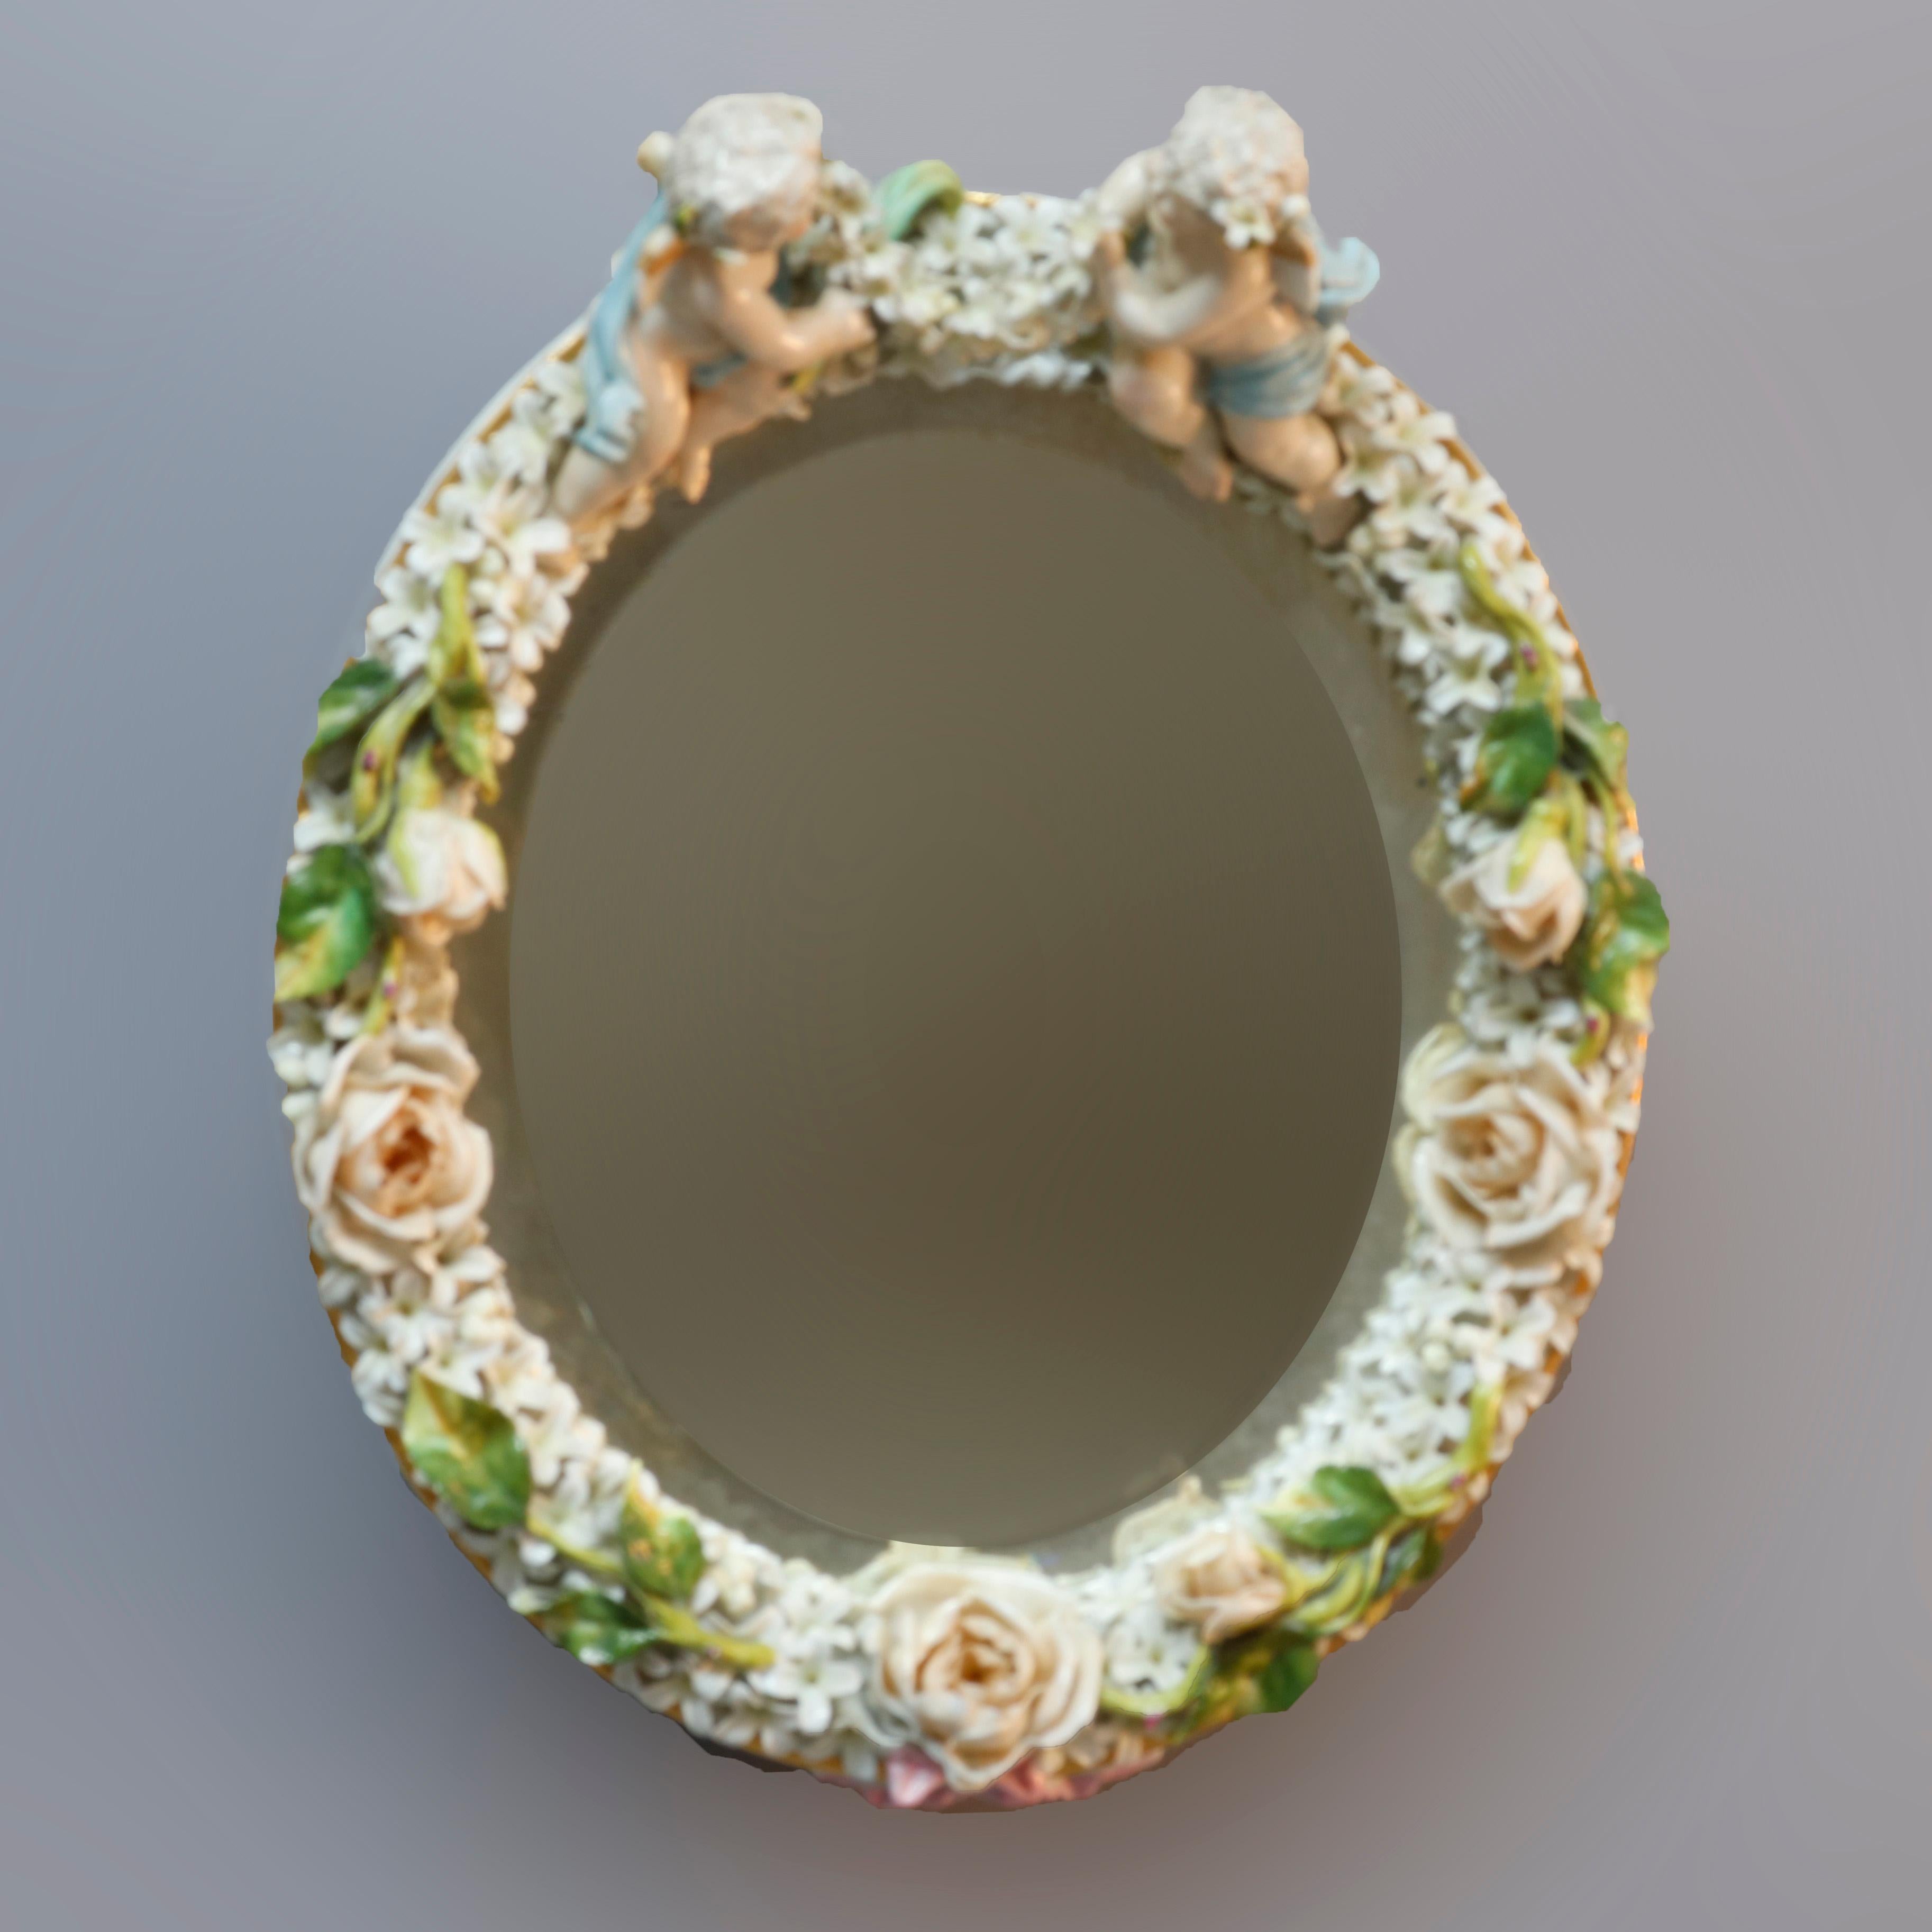 An antique German Dresden figural wall mirror features porcelain construction with playful Classical cherubs at crest and flowers throughout, 19th century

Measures: 12.75